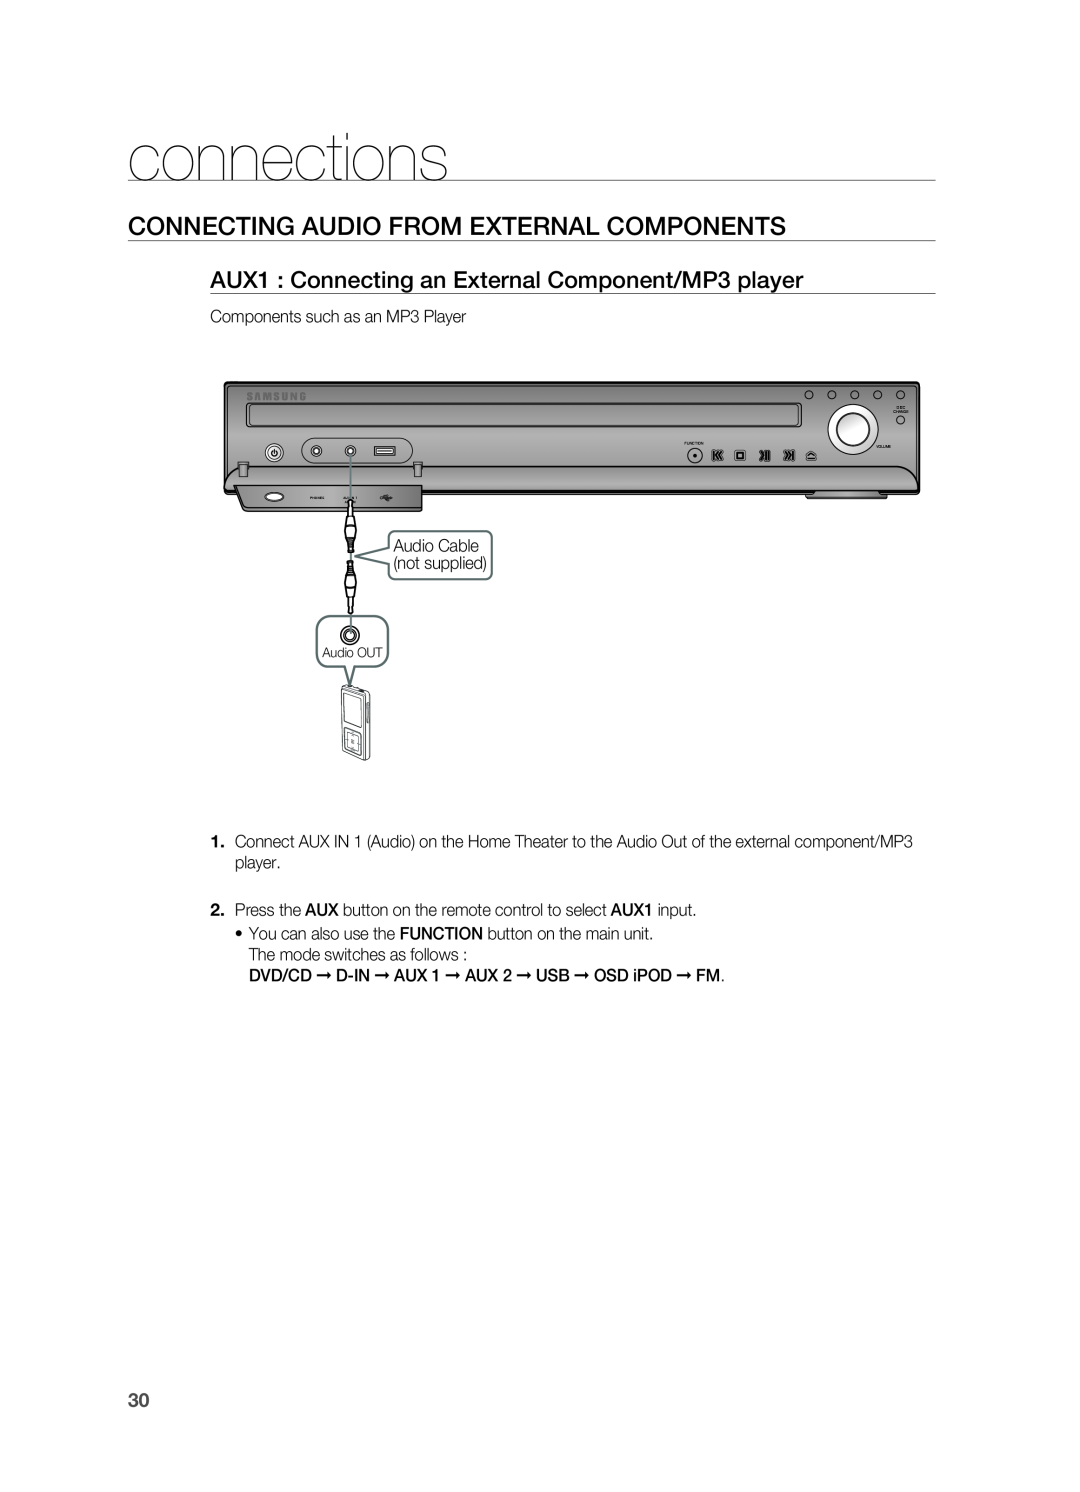 Samsung HT-TWZ415 user manual Connecting Audio from External Components, connections 